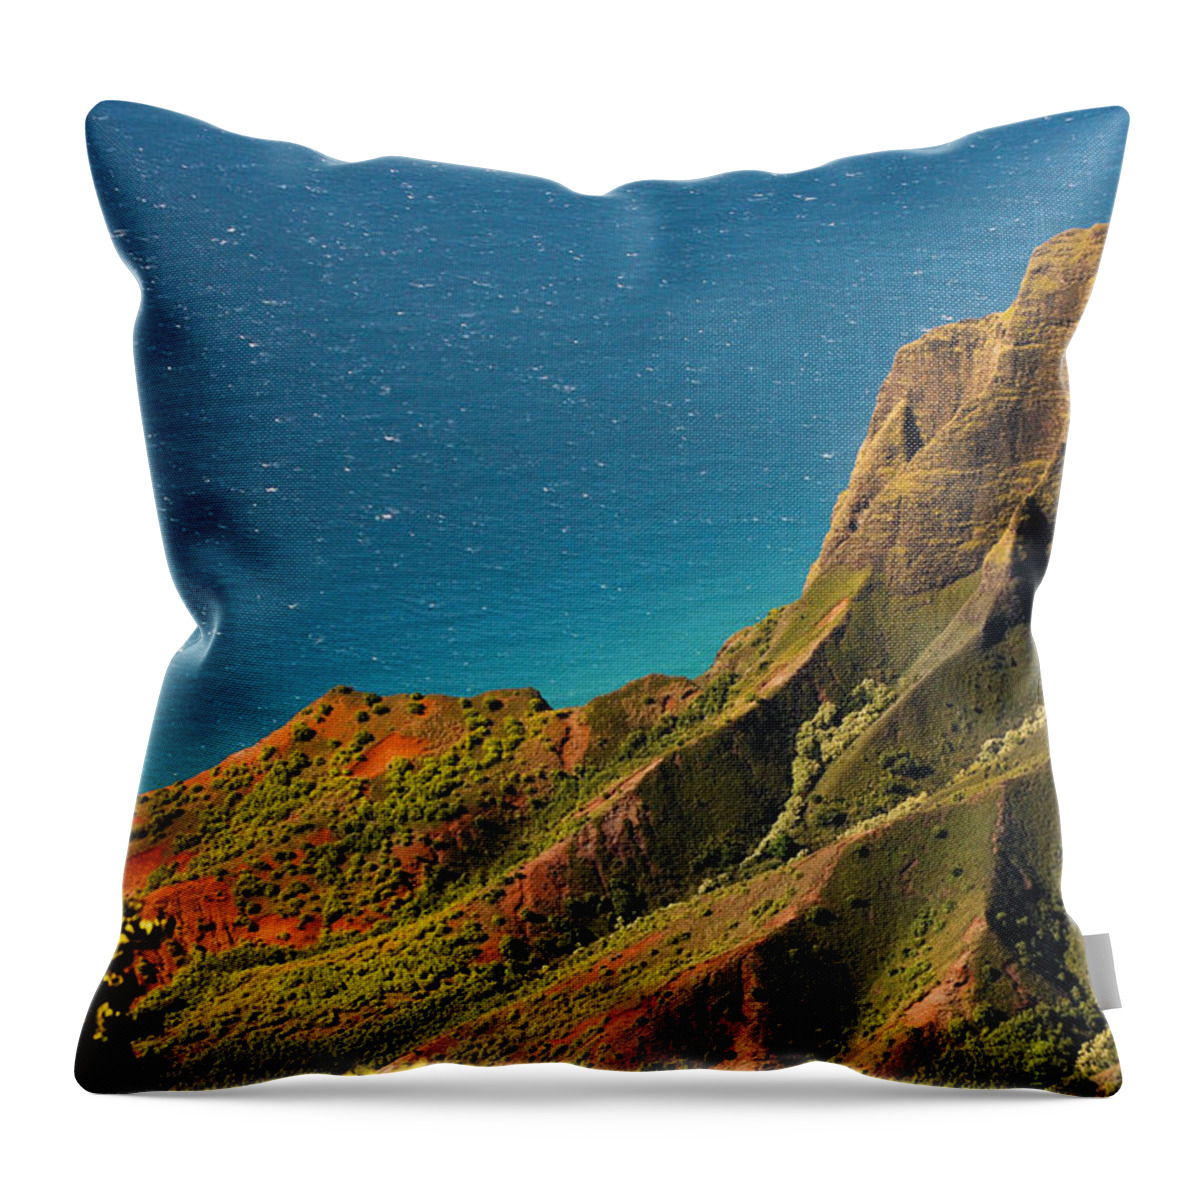 Pacific Ocean Throw Pillow featuring the photograph From the Hills of Kauai by Debbie Karnes